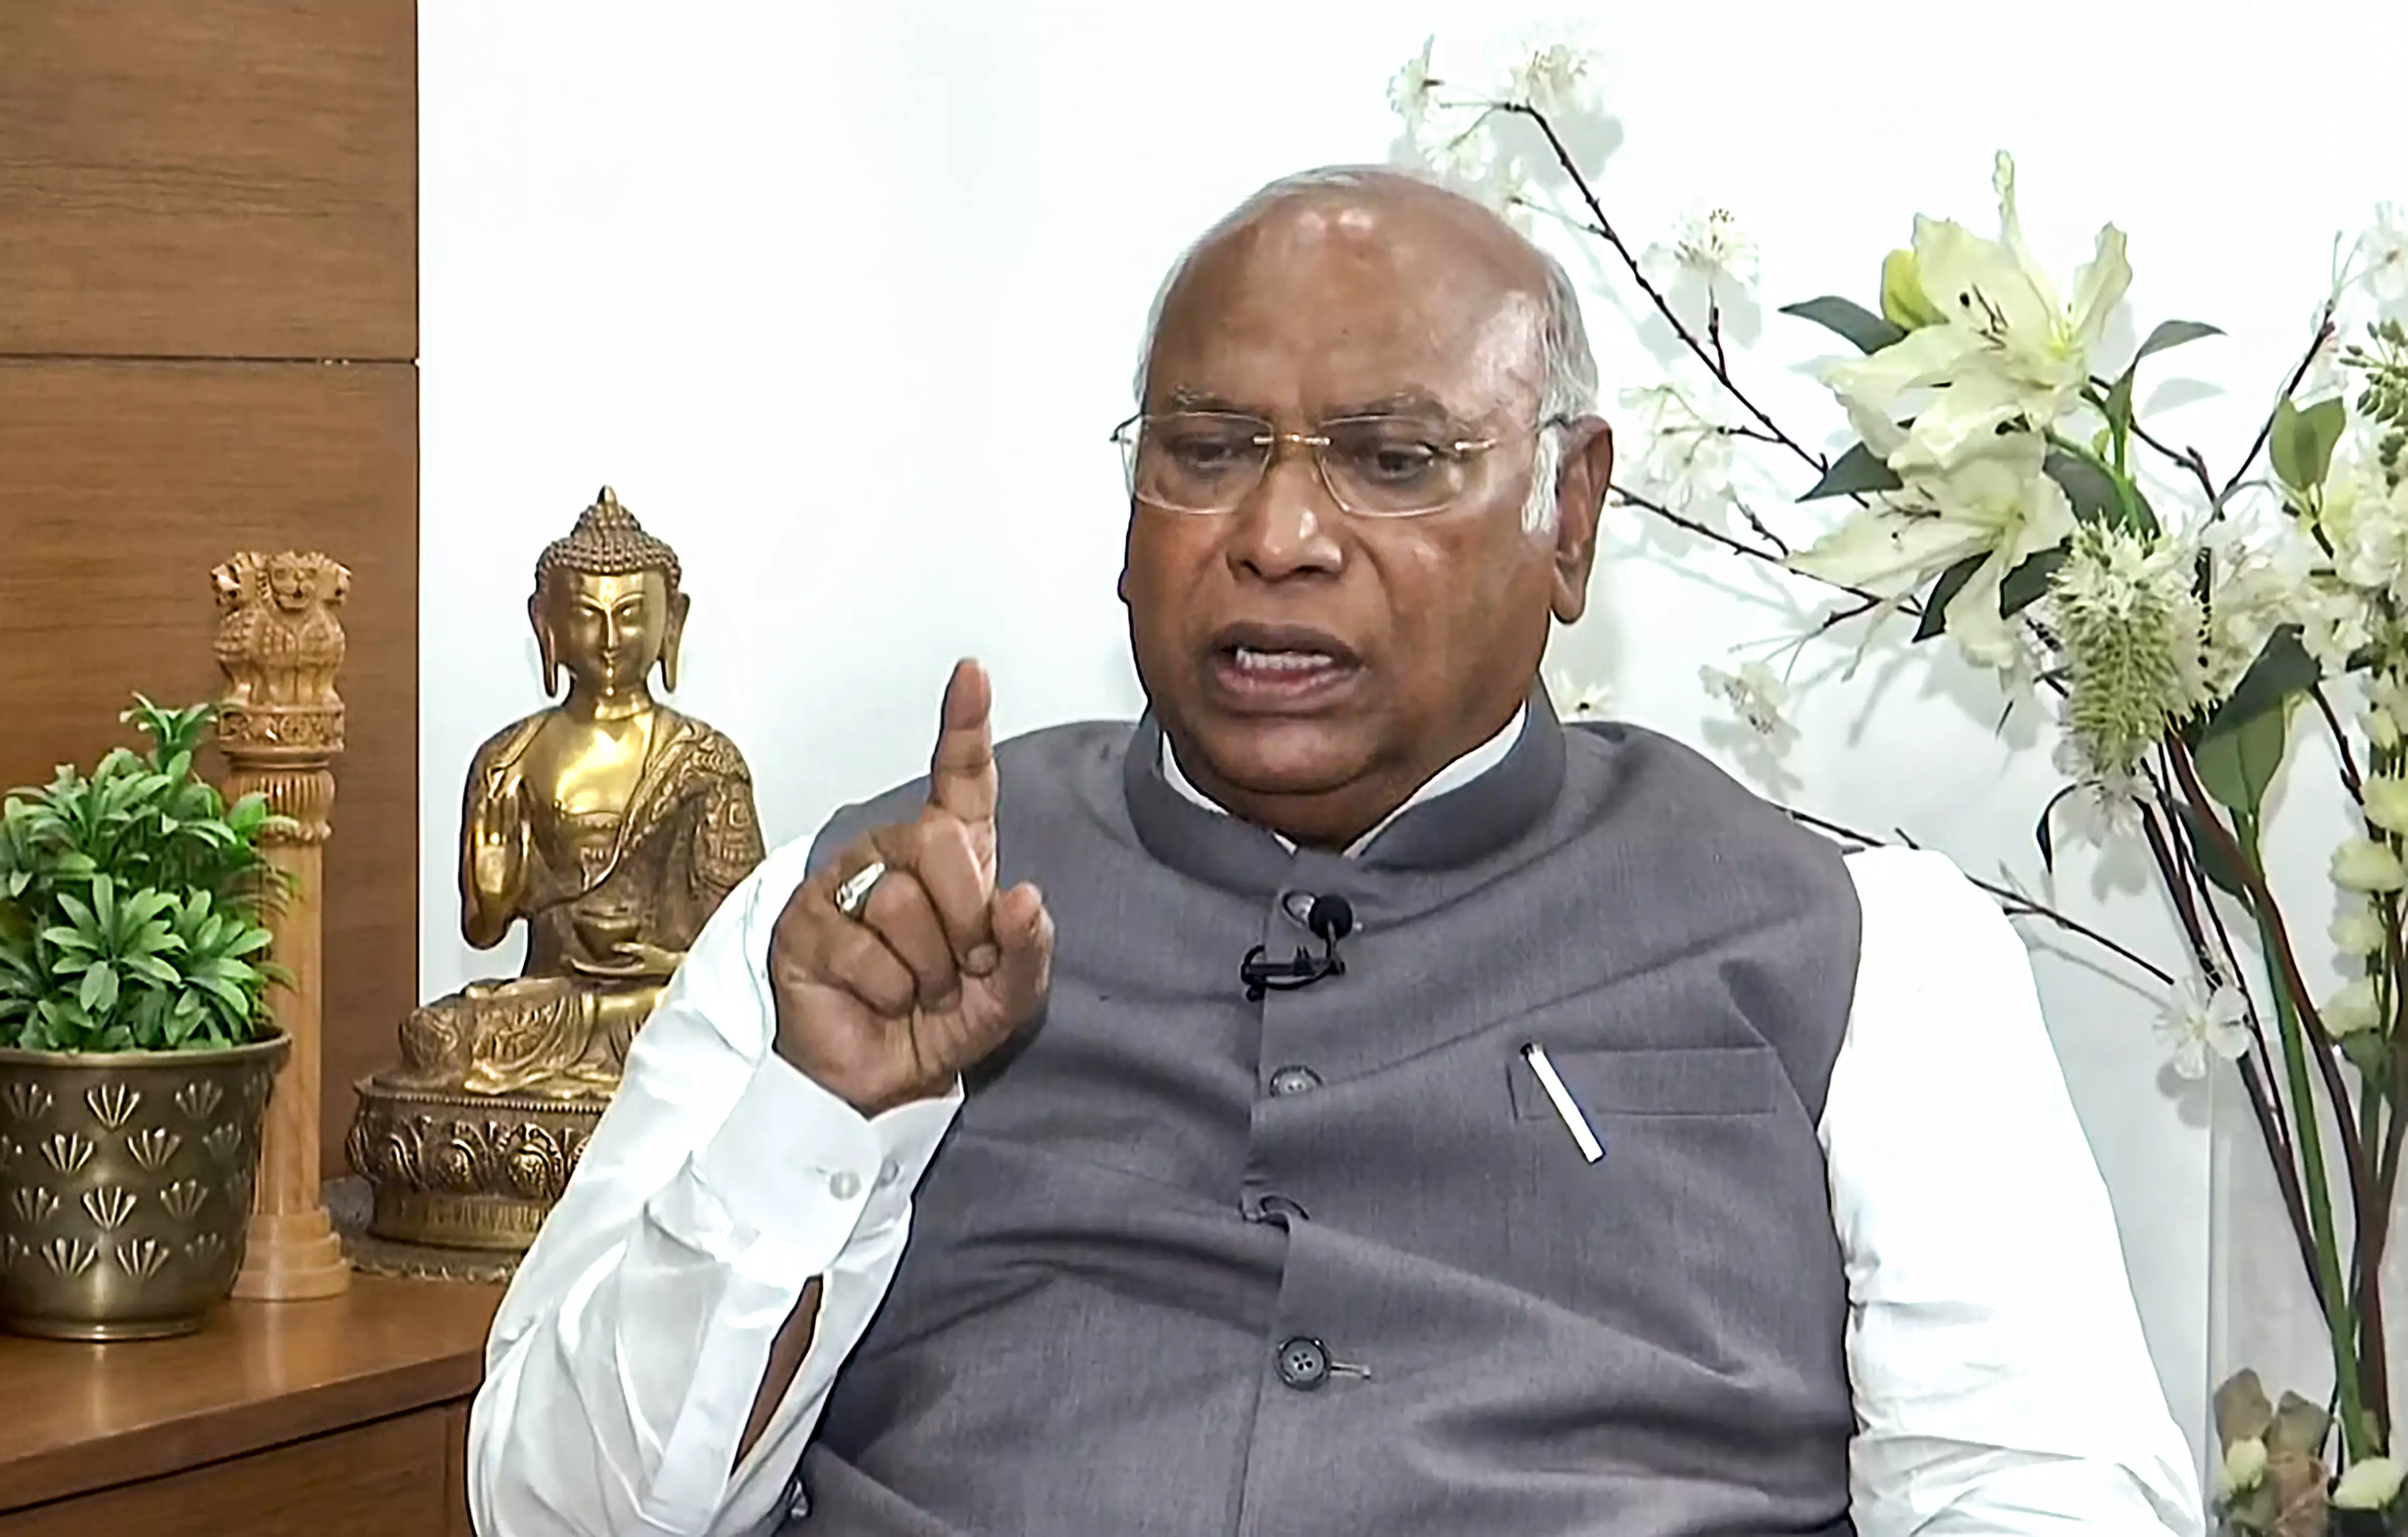 New criminal laws passed forcibly, INDIA bloc will not allow bulldozer justice: Kharge